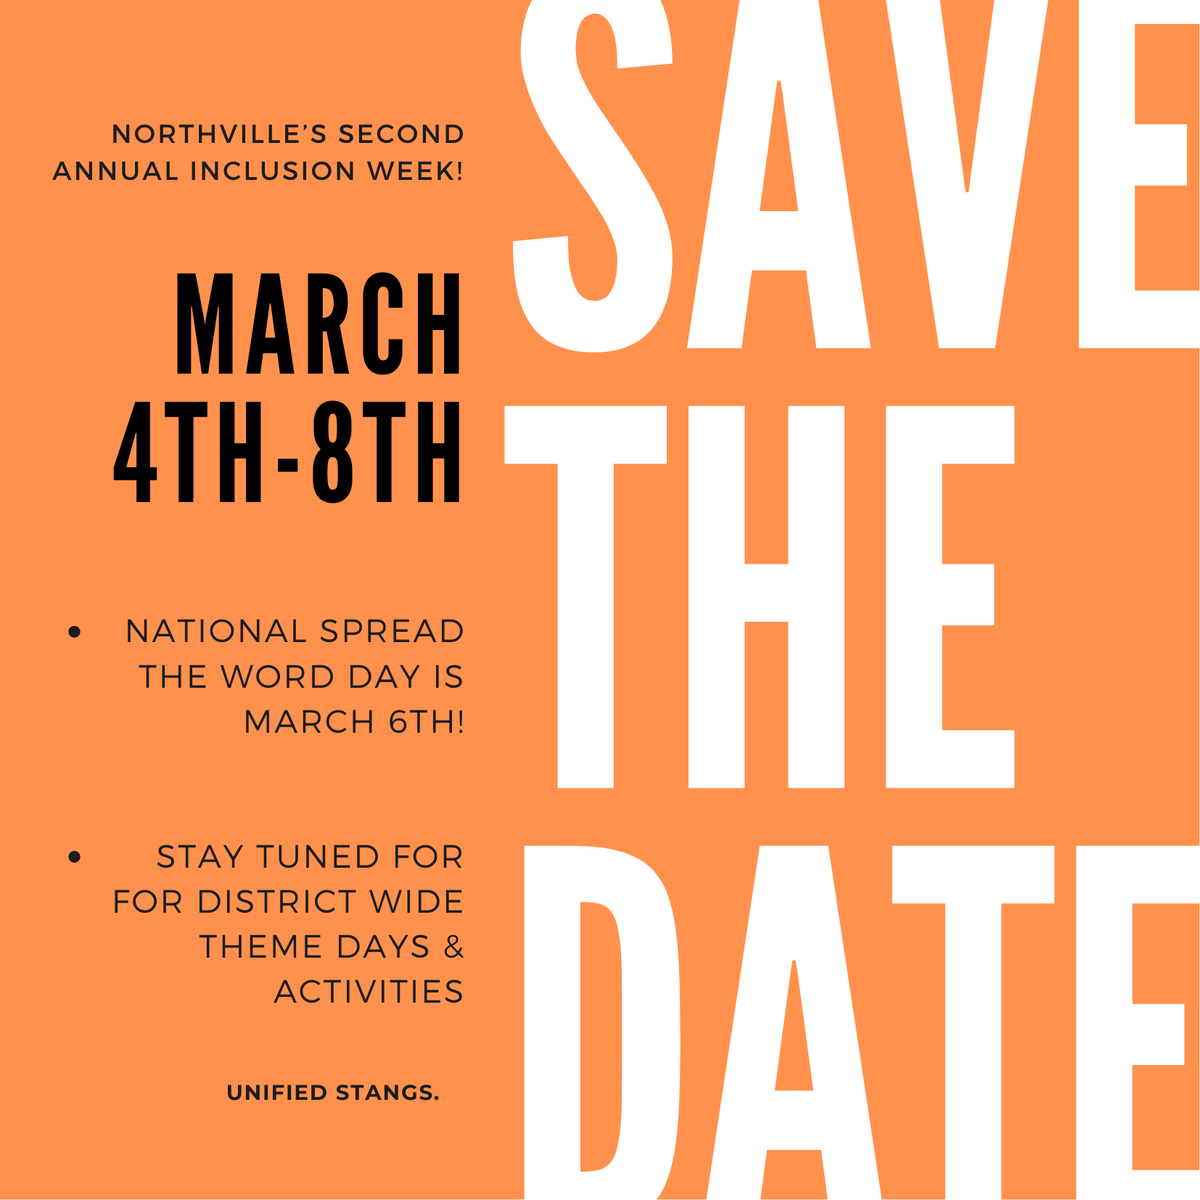 Save the Date: Northville's second annual inclusion week! March 4th-8th, 2024. National Spread the word day is March 6th. Stay tuned for district wide theme days and activities. Unified Stangs.